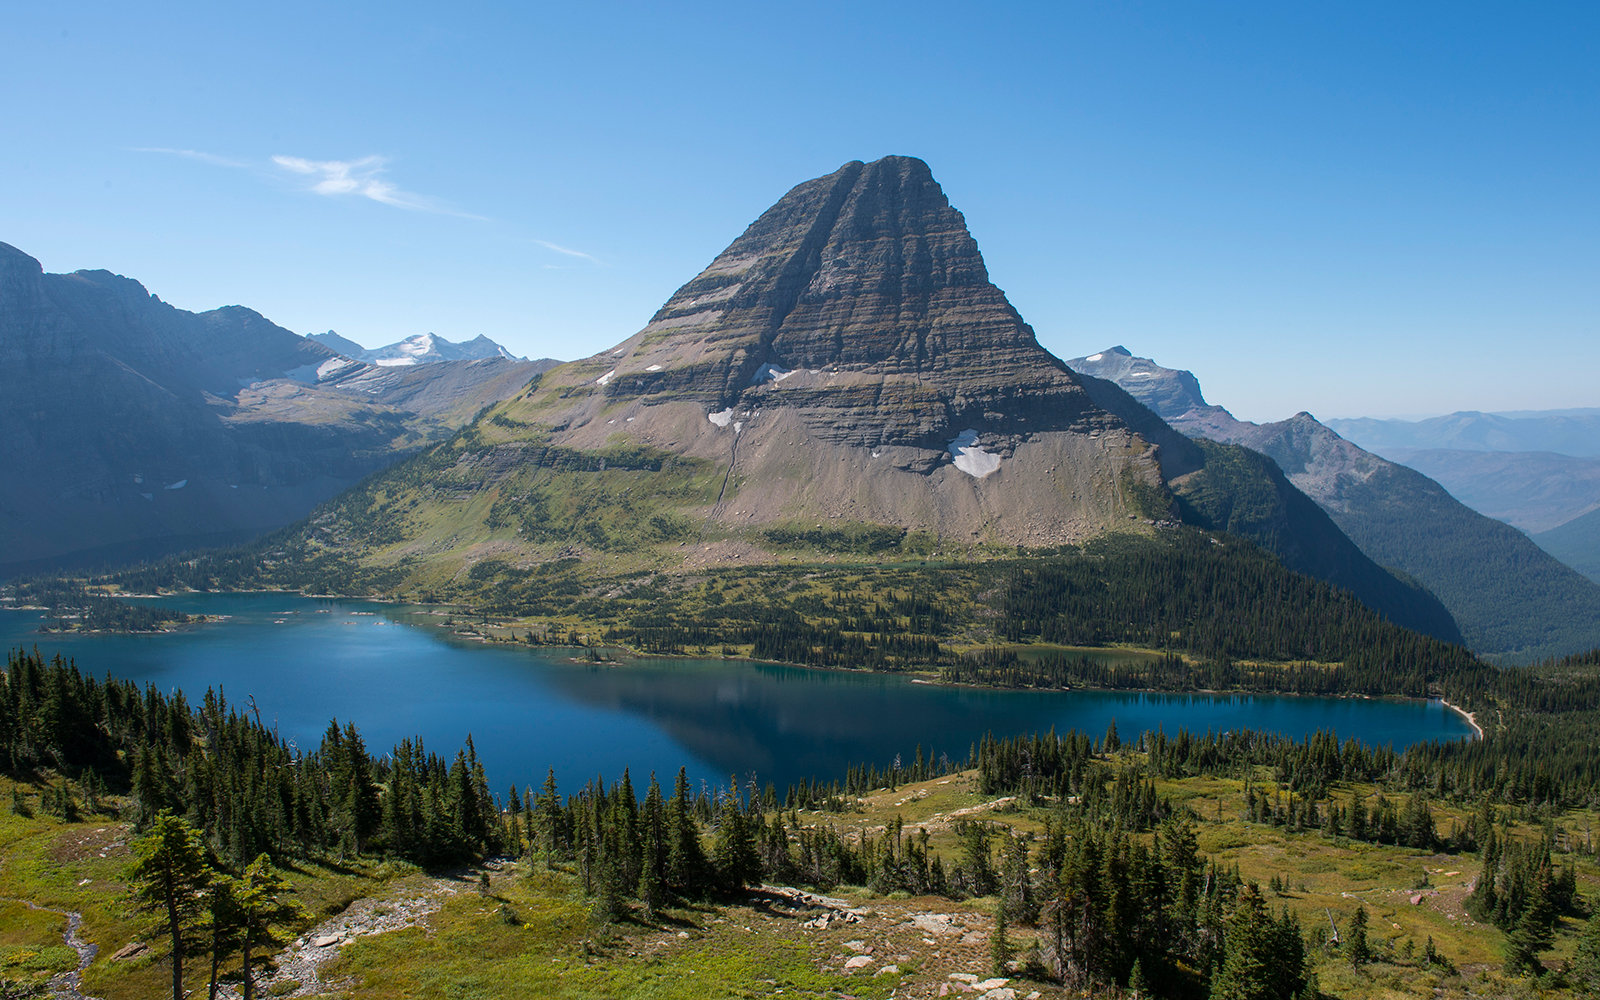 No American Has Got Perfect Score on This Quiz Without Cheating View of Bearhat Mountain above Hidden Lake at Logan Pass in